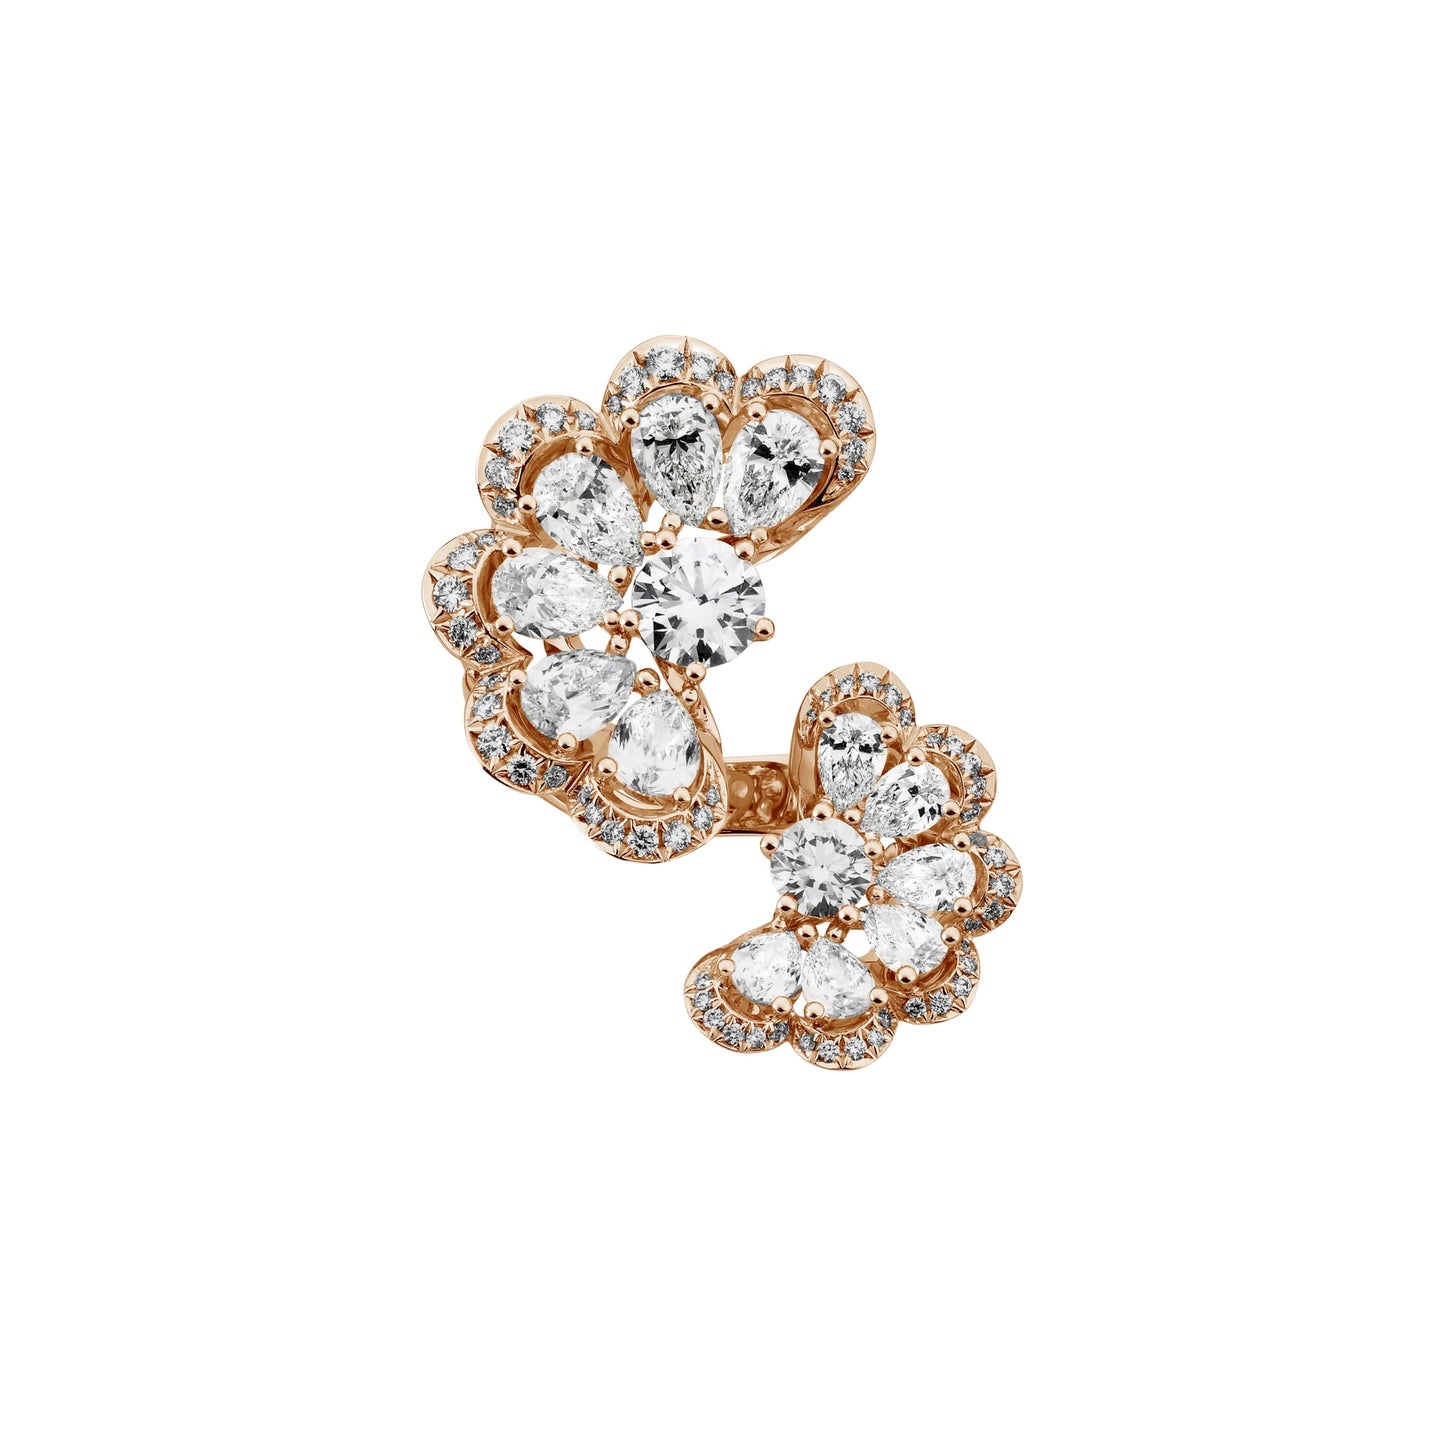 PRECIOUS LACE NUAGE RING, ETHICAL ROSE GOLD, DIAMONDS 828351-5010